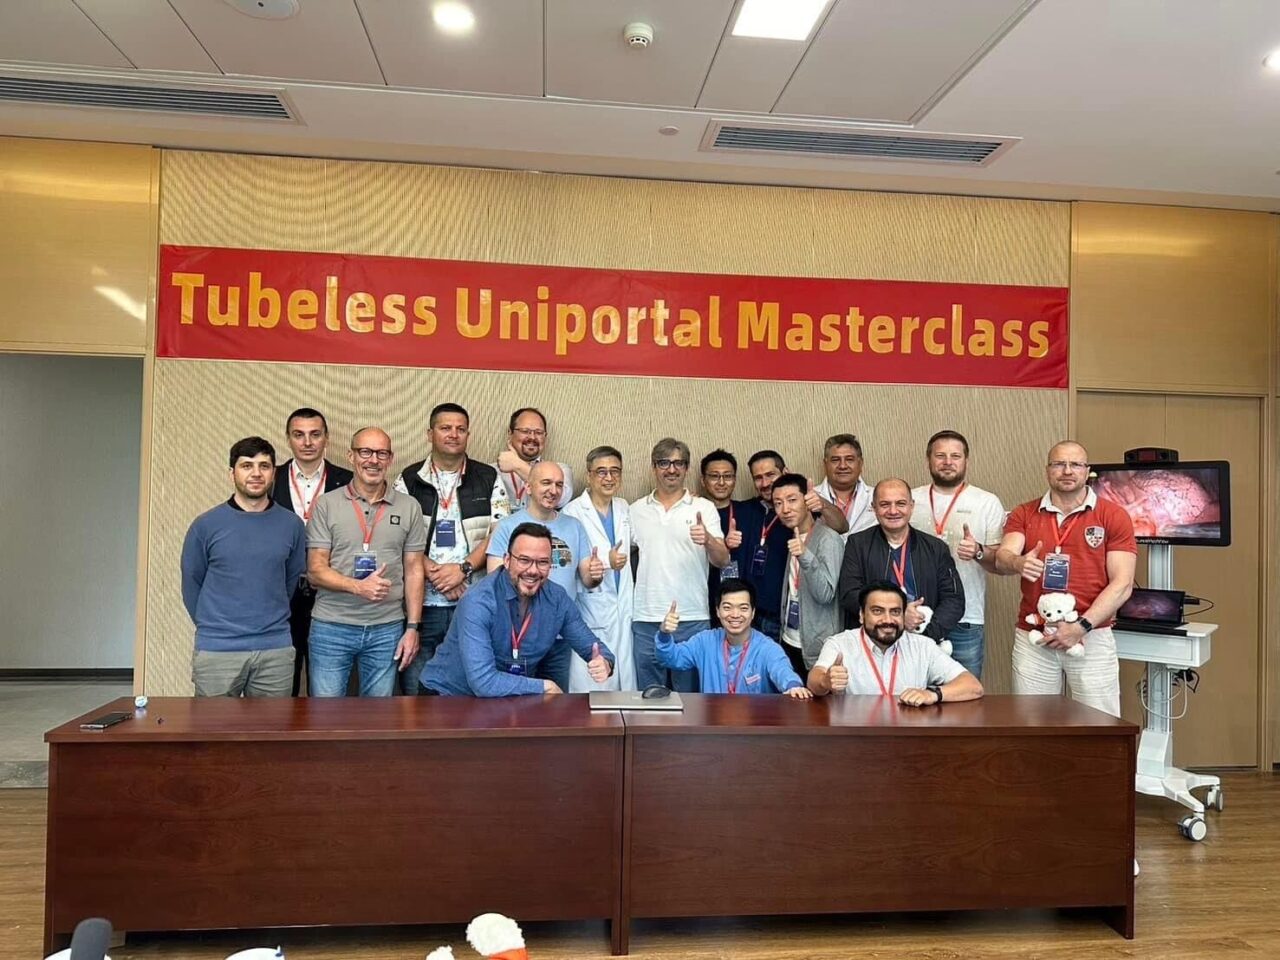 Gor Melikyan: I had the incredible opportunity to participate in a masterclass called ‘Tubelss Uniportal VATS’ in Guangzhou